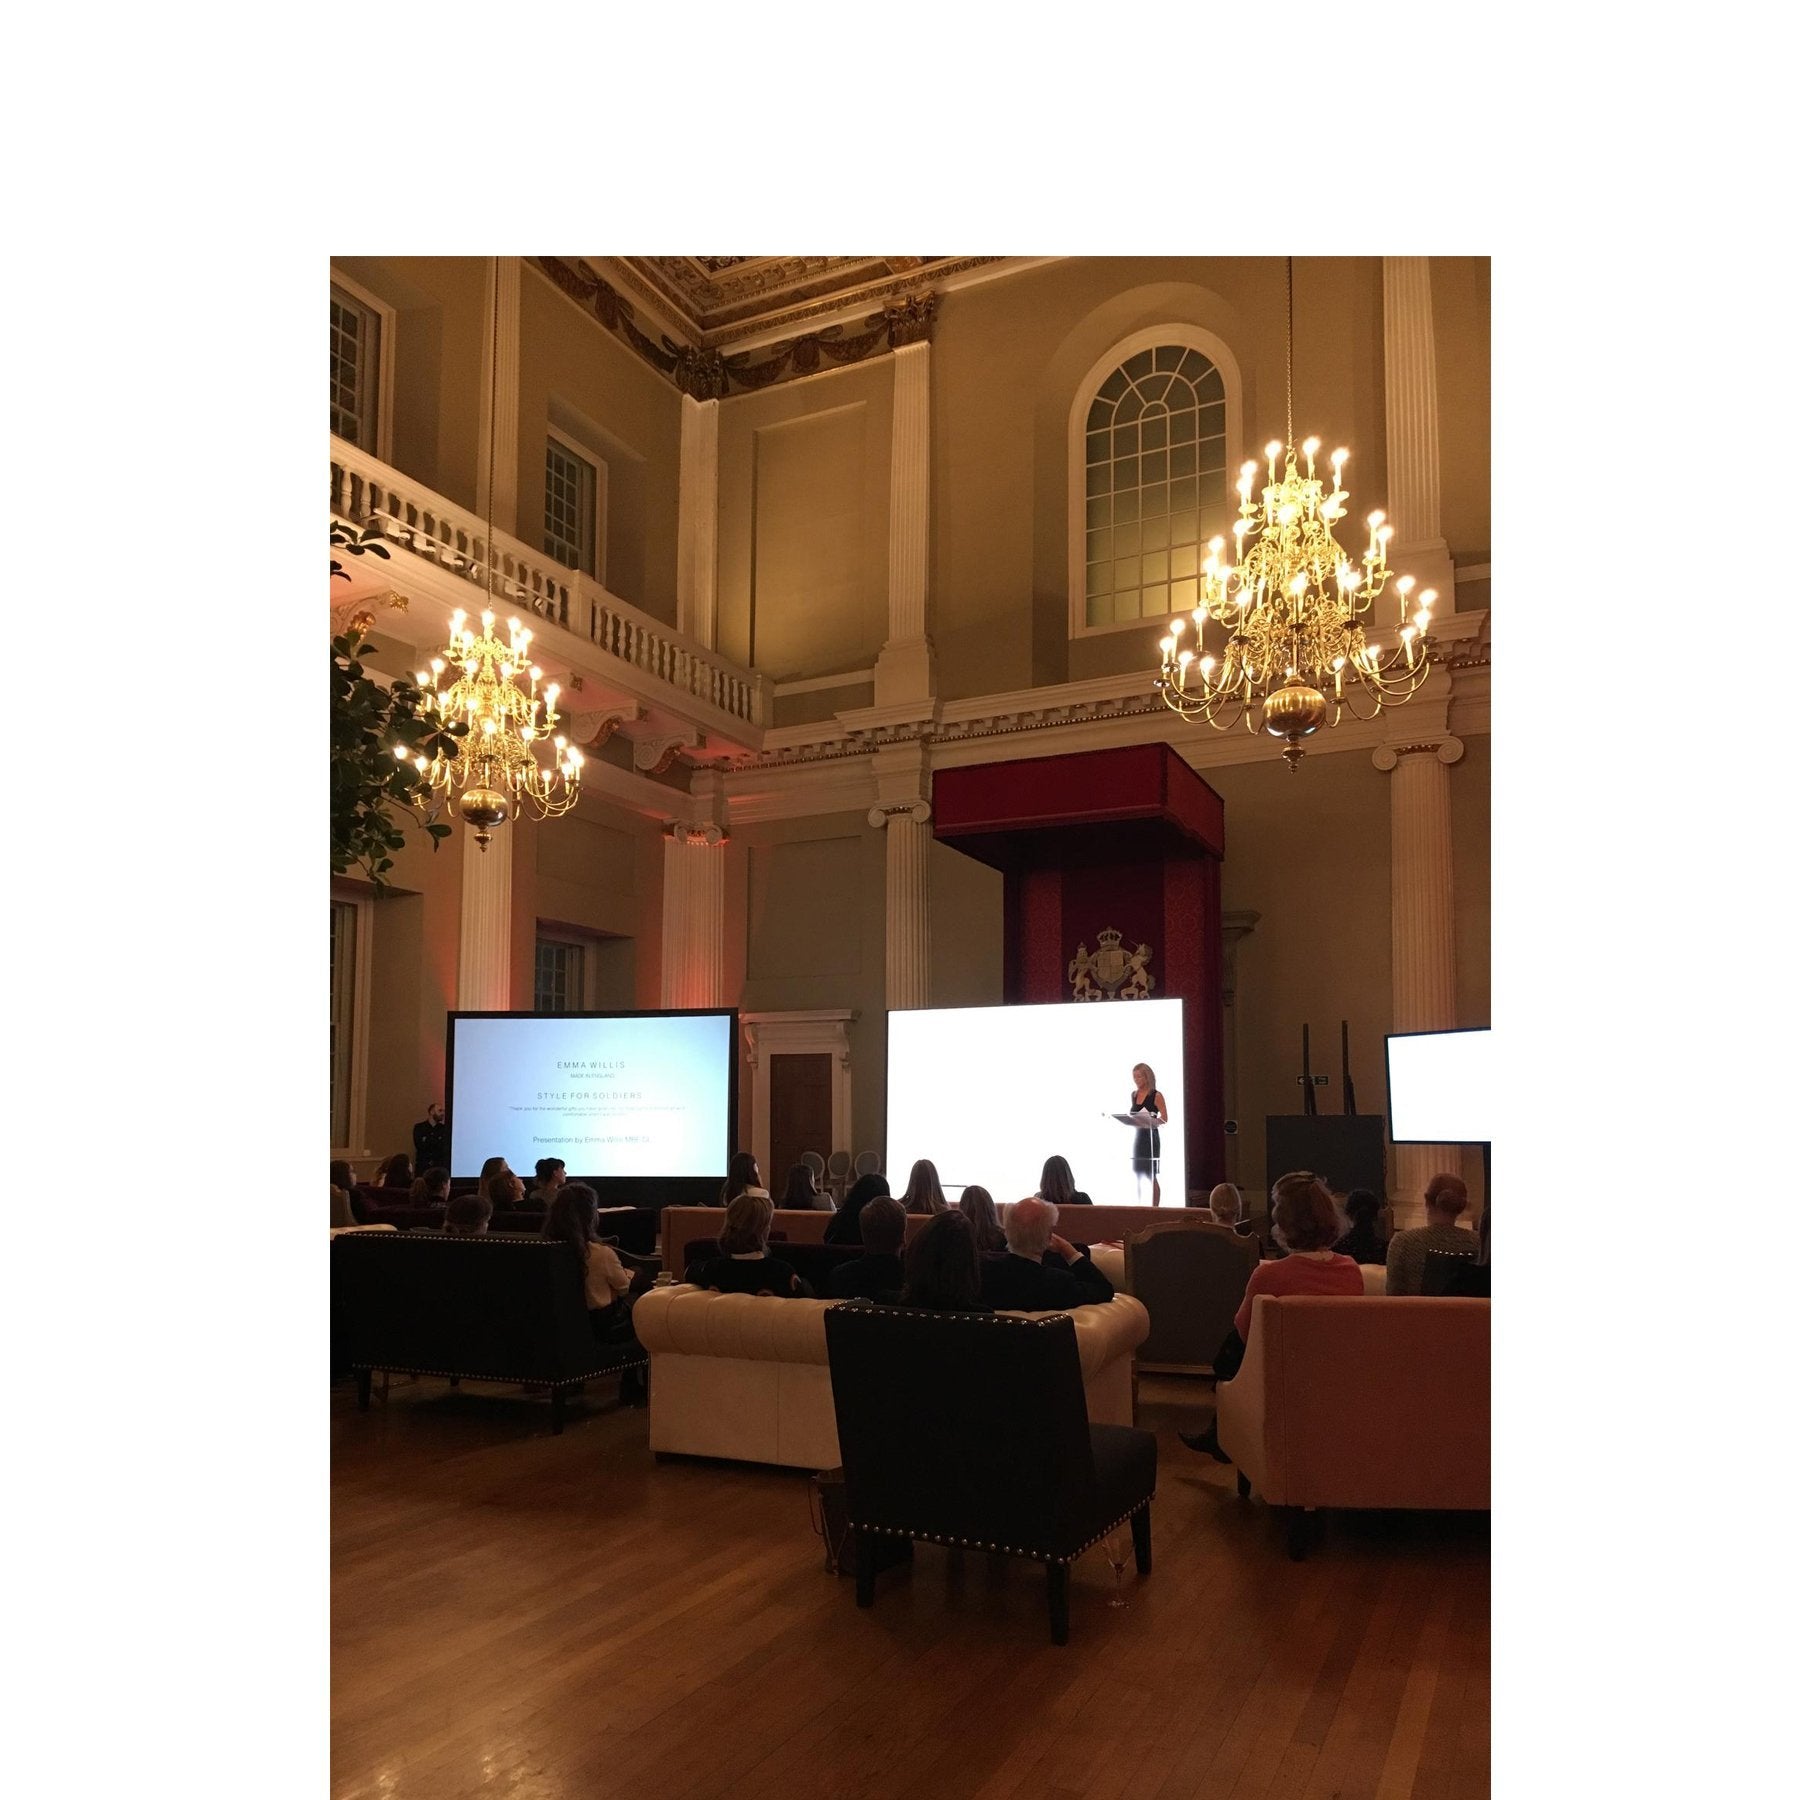 Emma invited as Inspirational Speaker at Banqueting House, Whitehall in London today followed by Drinks reception serving Coates and Seely pink champagne and Rhubarb canapés. - Emma Willis